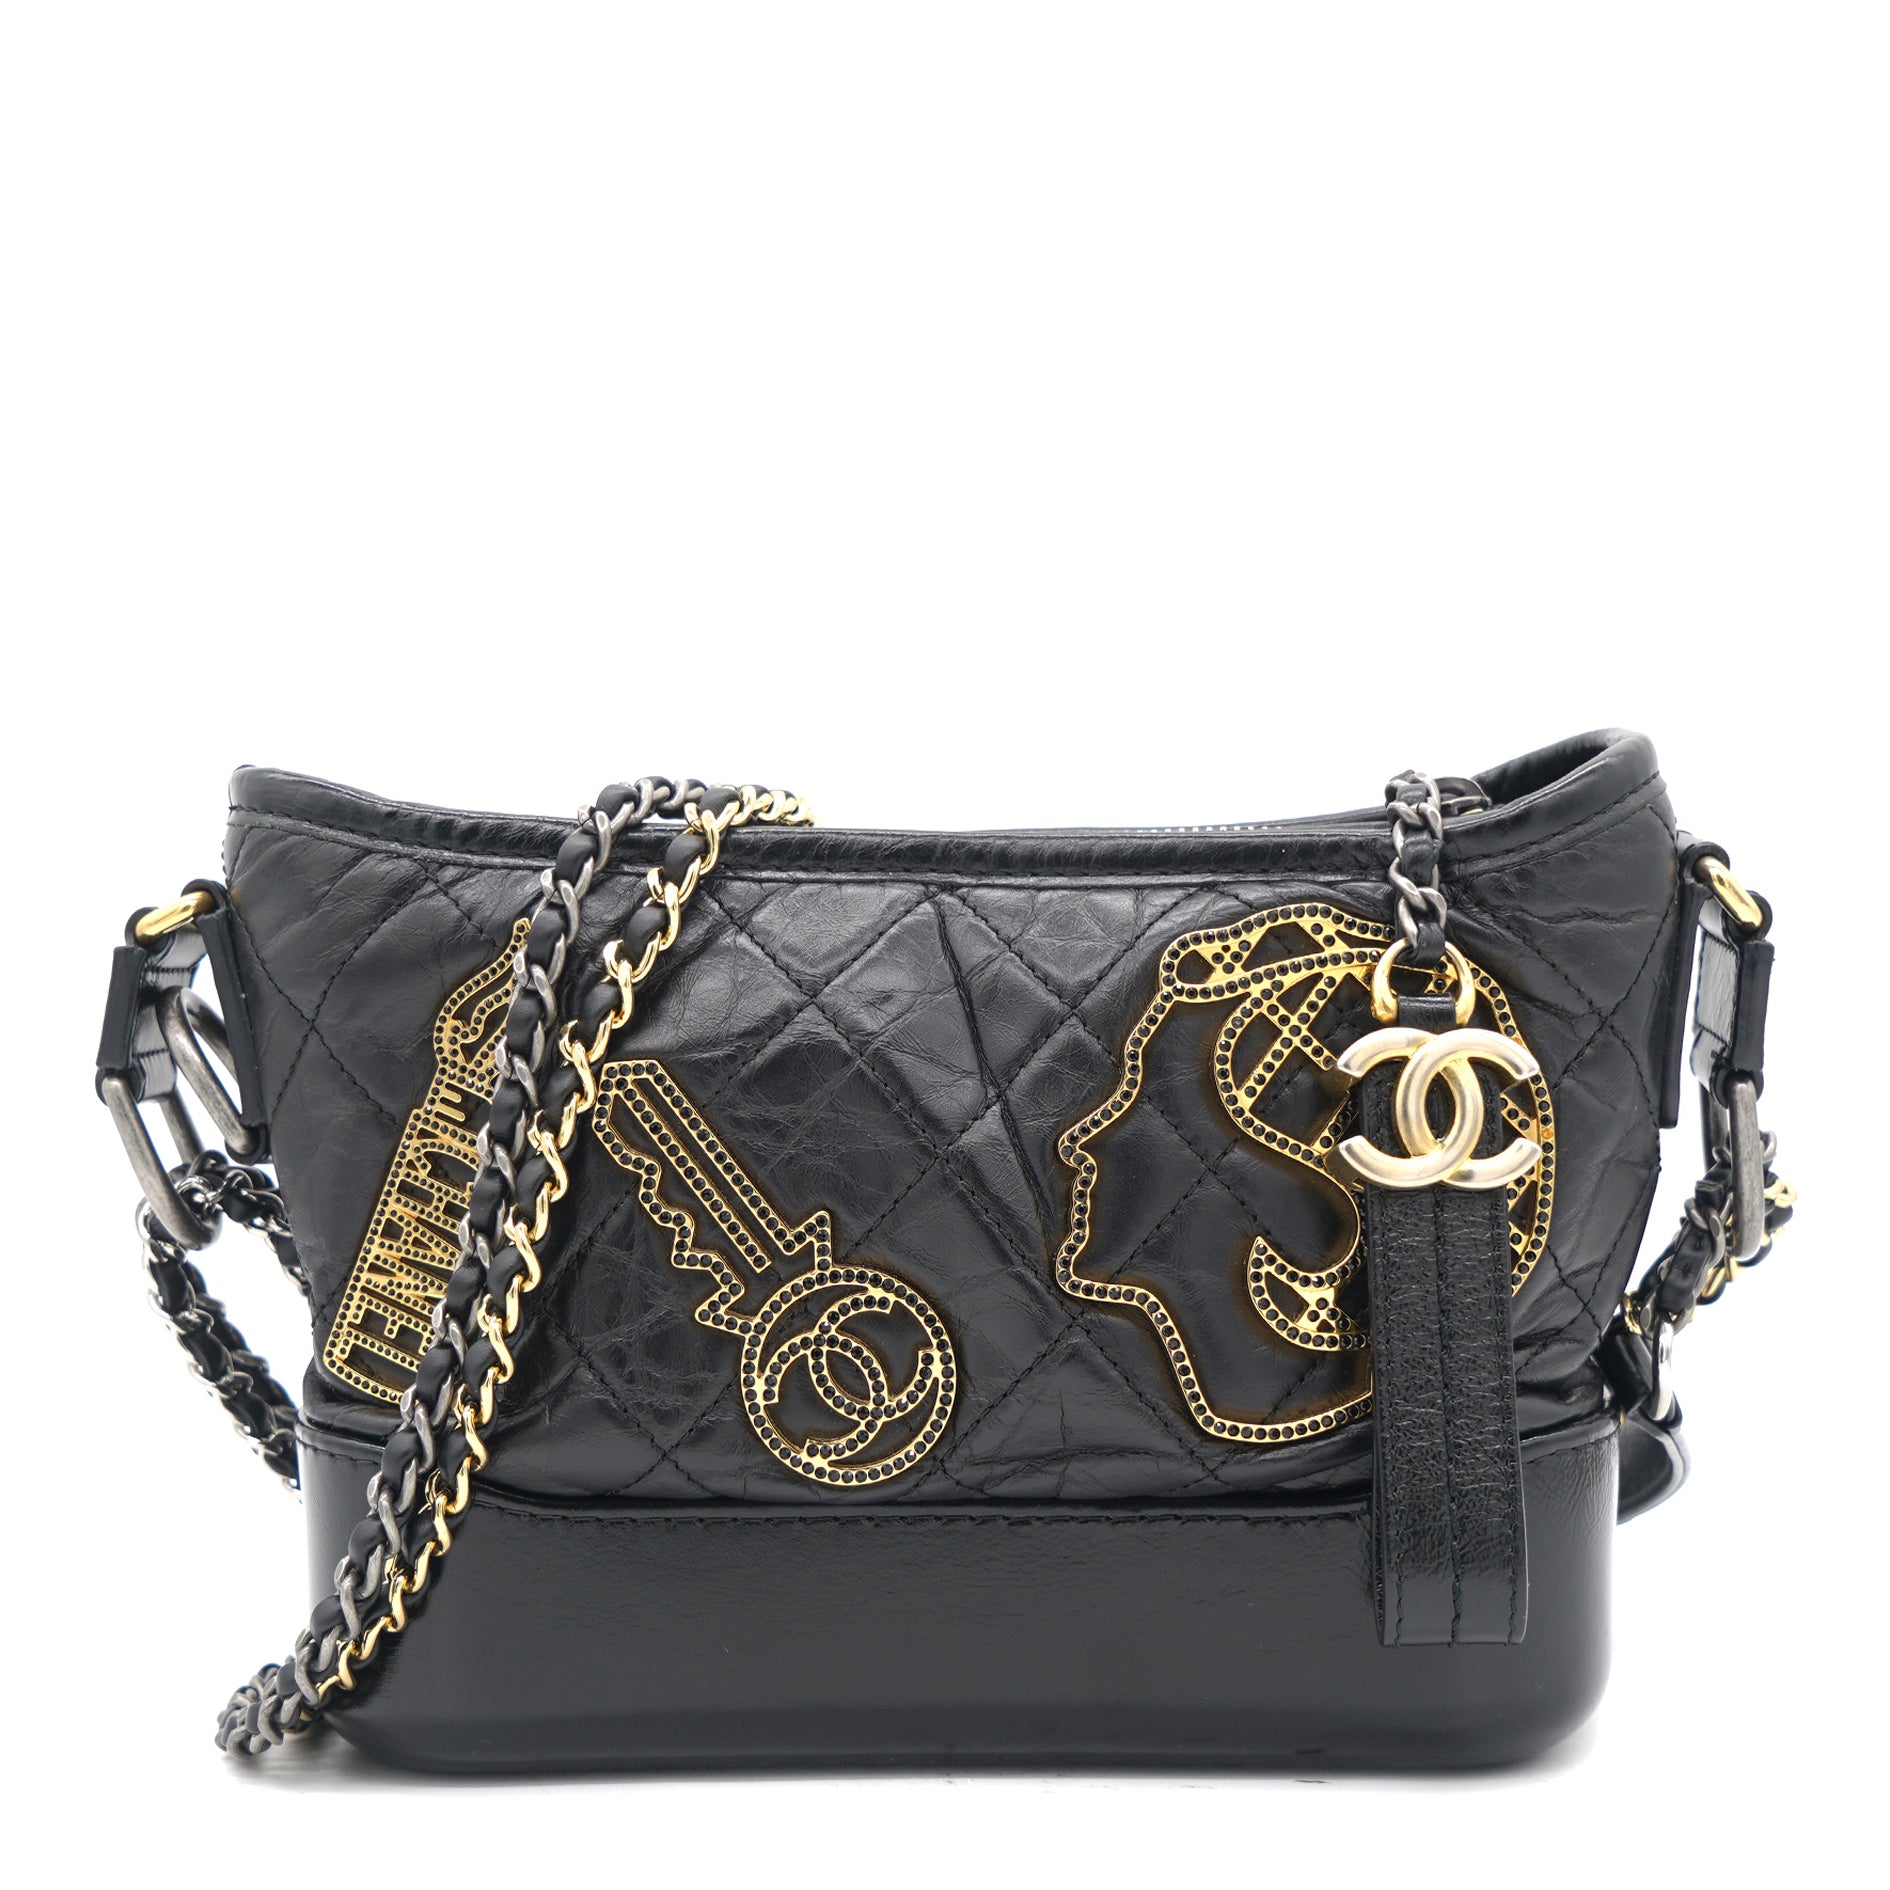 Chanel Gabrielle Hobo Bag Quilted Aged Calfskin Beige/Black in